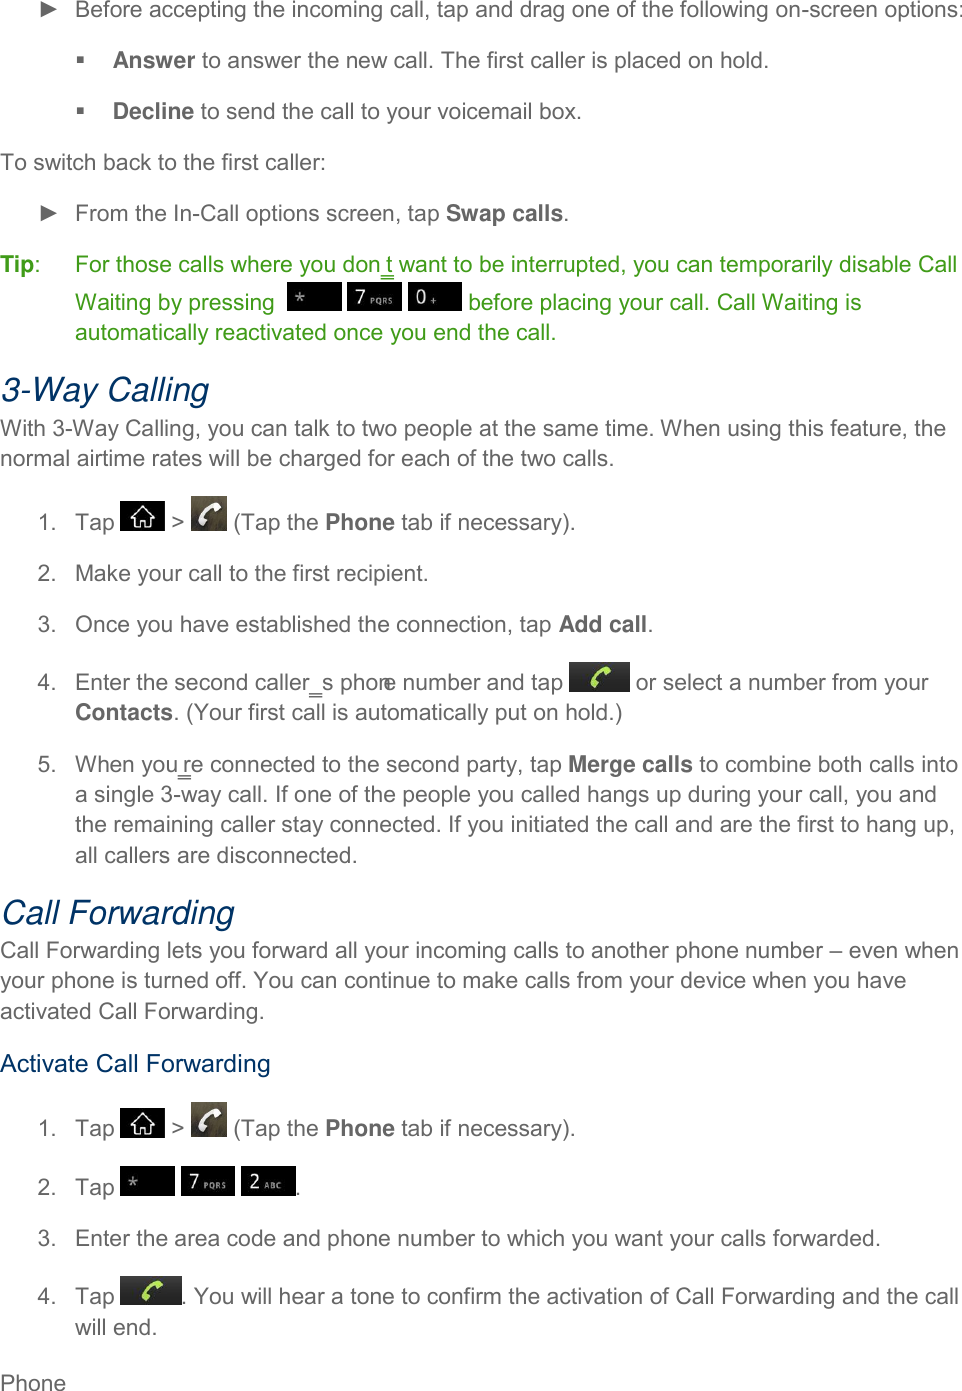 Phone     ►  Before accepting the incoming call, tap and drag one of the following on-screen options:  Answer to answer the new call. The first caller is placed on hold.  Decline to send the call to your voicemail box. To switch back to the first caller: ►  From the In-Call options screen, tap Swap calls. Tip:   For those calls where you don‗t want to be interrupted, you can temporarily disable Call Waiting by pressing        before placing your call. Call Waiting is automatically reactivated once you end the call. 3-Way Calling With 3-Way Calling, you can talk to two people at the same time. When using this feature, the normal airtime rates will be charged for each of the two calls. 1.  Tap   &gt;   (Tap the Phone tab if necessary). 2.  Make your call to the first recipient. 3.  Once you have established the connection, tap Add call. 4.  Enter the second caller‗s phone number and tap   or select a number from your Contacts. (Your first call is automatically put on hold.) 5.  When you‗re connected to the second party, tap Merge calls to combine both calls into a single 3-way call. If one of the people you called hangs up during your call, you and the remaining caller stay connected. If you initiated the call and are the first to hang up, all callers are disconnected. Call Forwarding Call Forwarding lets you forward all your incoming calls to another phone number – even when your phone is turned off. You can continue to make calls from your device when you have activated Call Forwarding. Activate Call Forwarding 1.  Tap   &gt;   (Tap the Phone tab if necessary). 2.  Tap      . 3.  Enter the area code and phone number to which you want your calls forwarded. 4.  Tap  . You will hear a tone to confirm the activation of Call Forwarding and the call will end. 